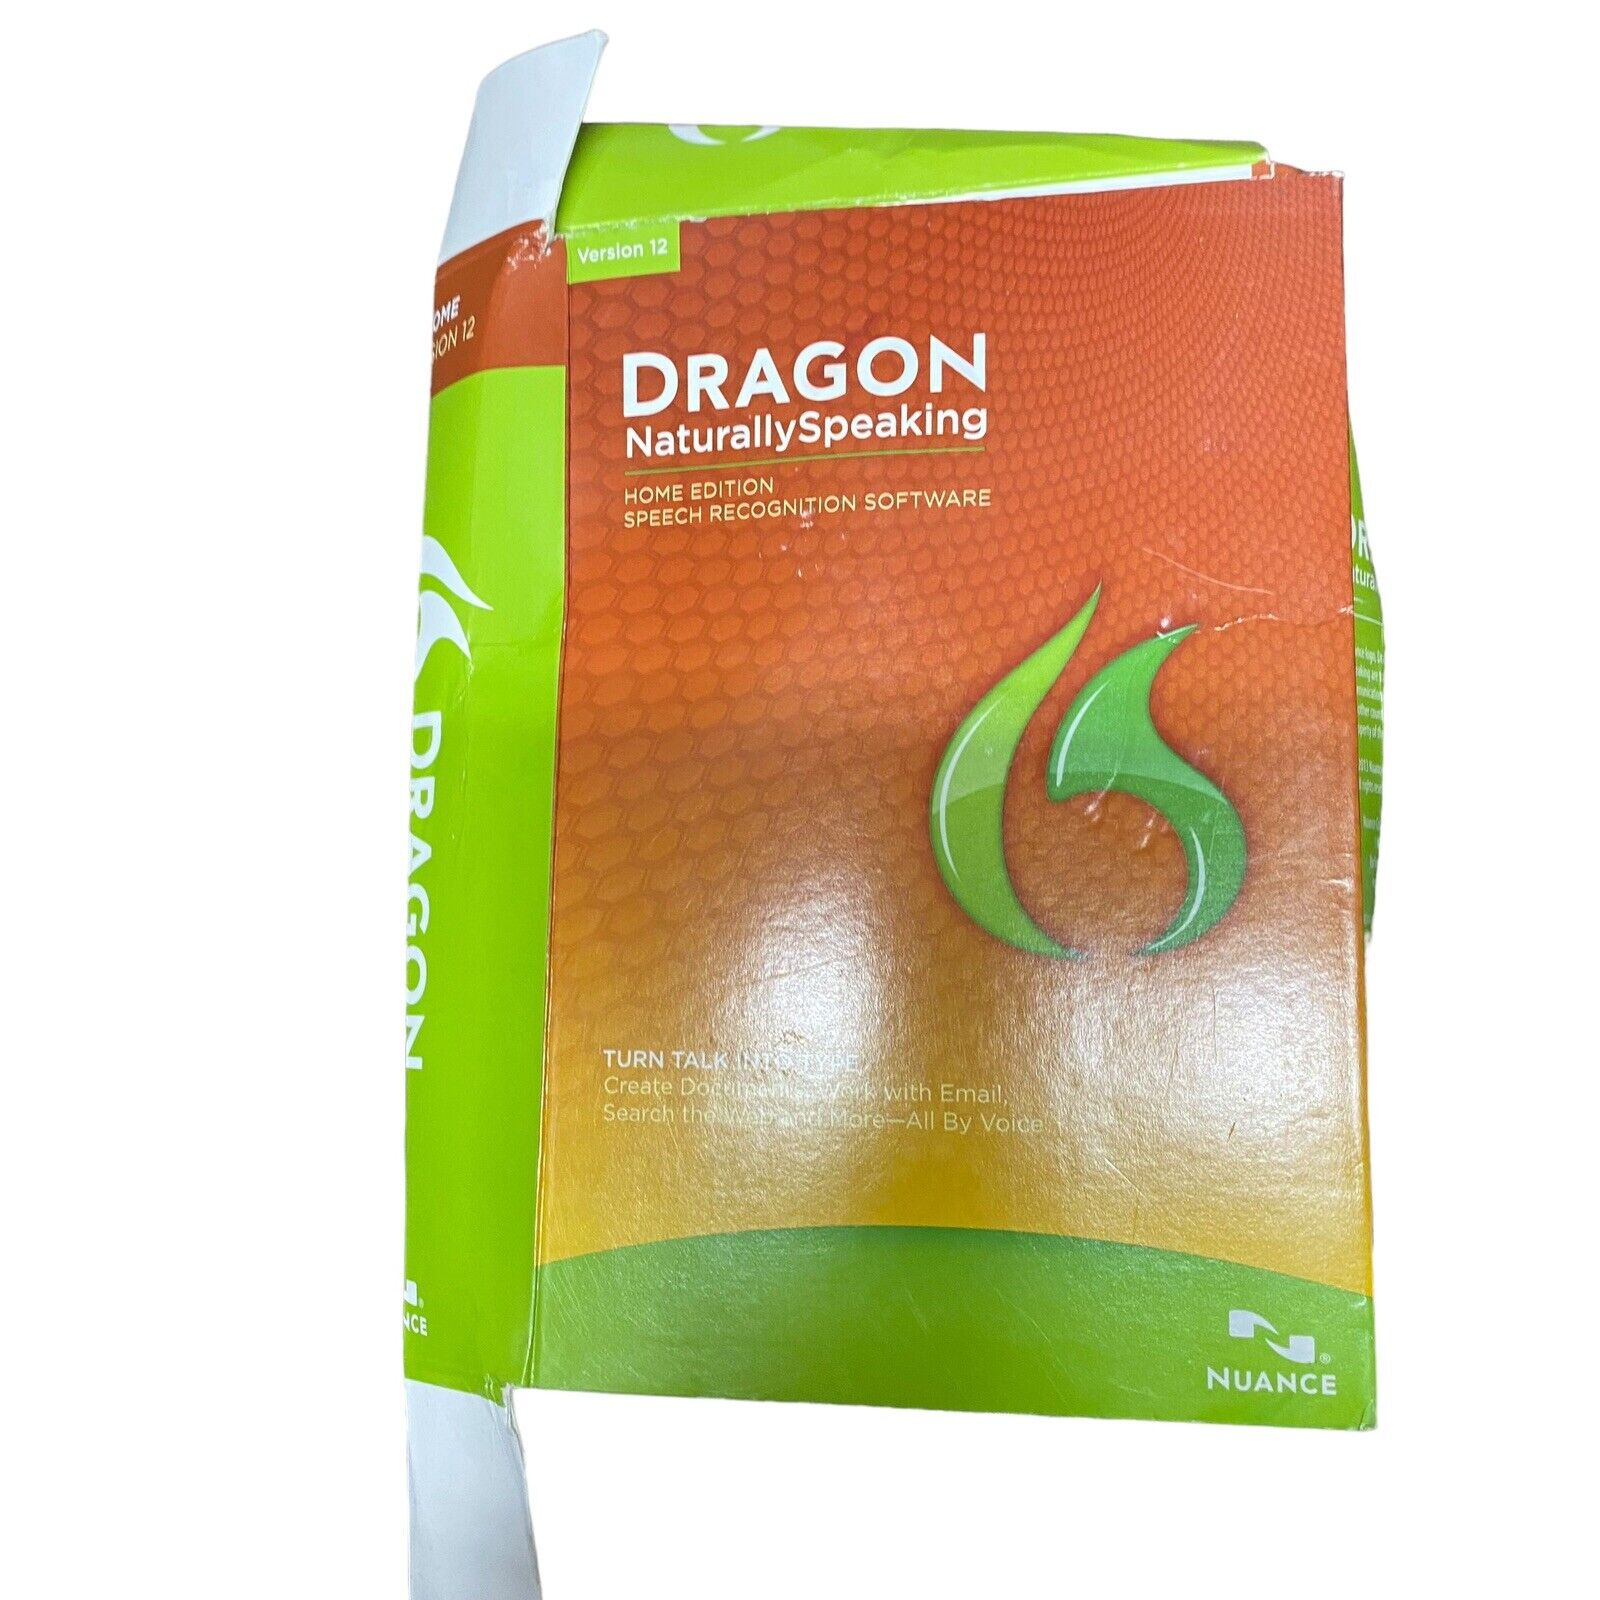 Dragon Naturally Speaking Home Version 12 Speech Recognition Software